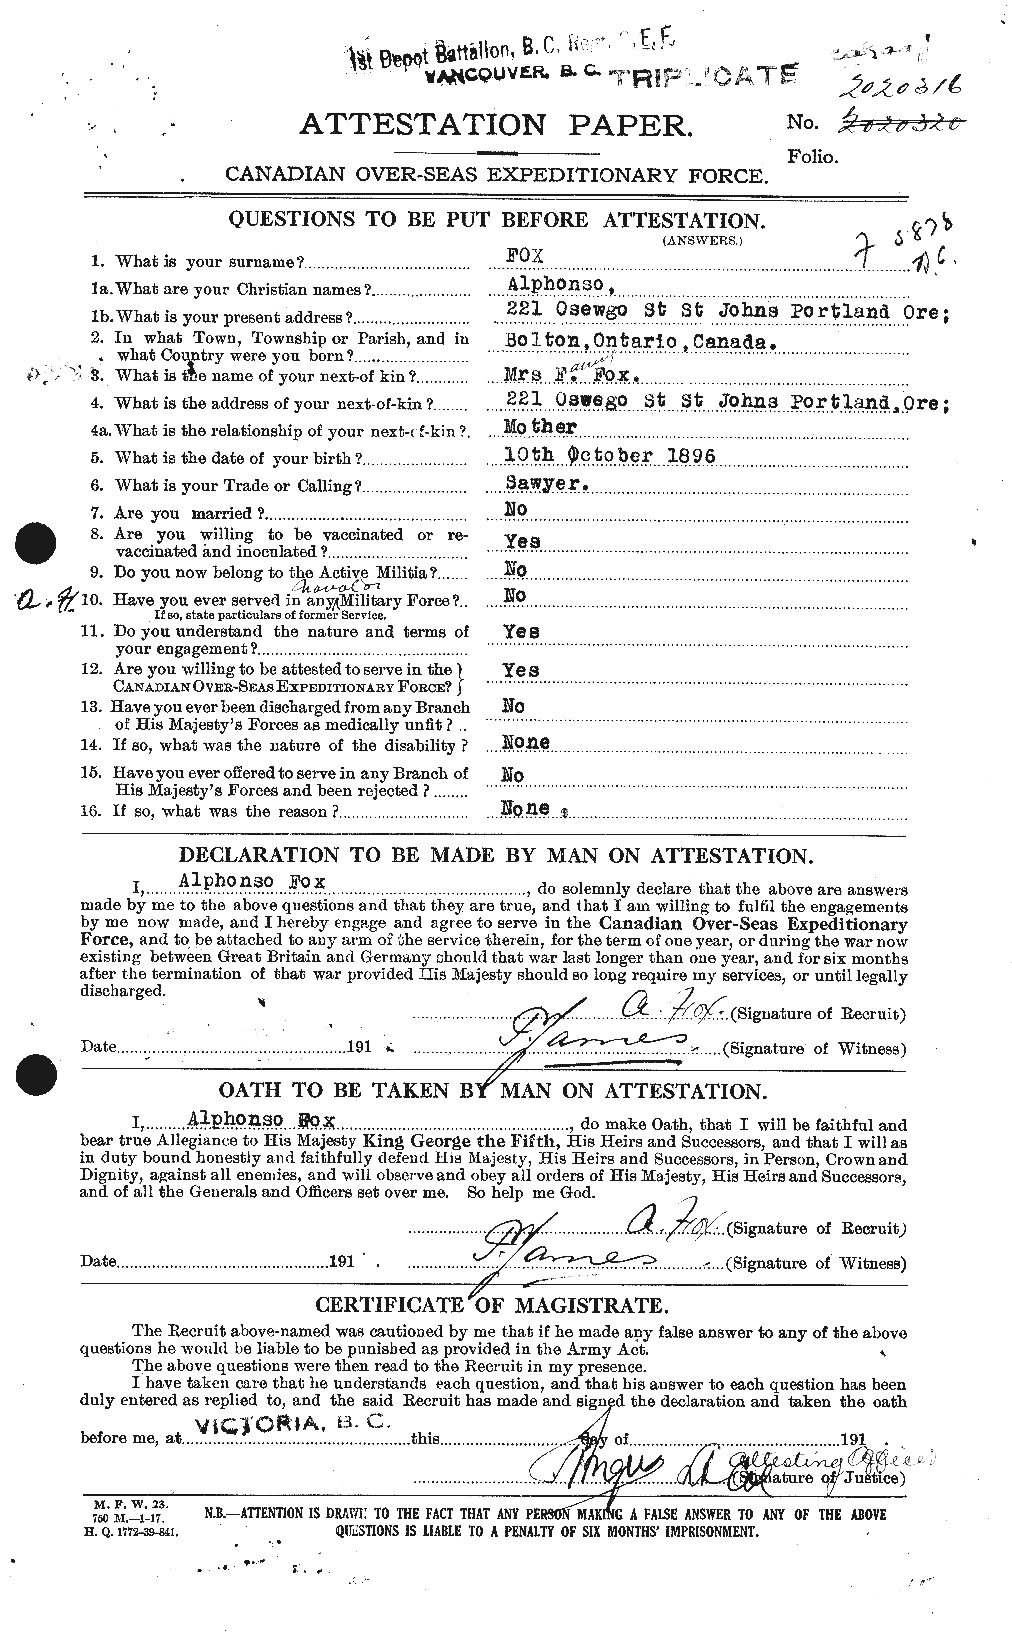 Personnel Records of the First World War - CEF 331216a